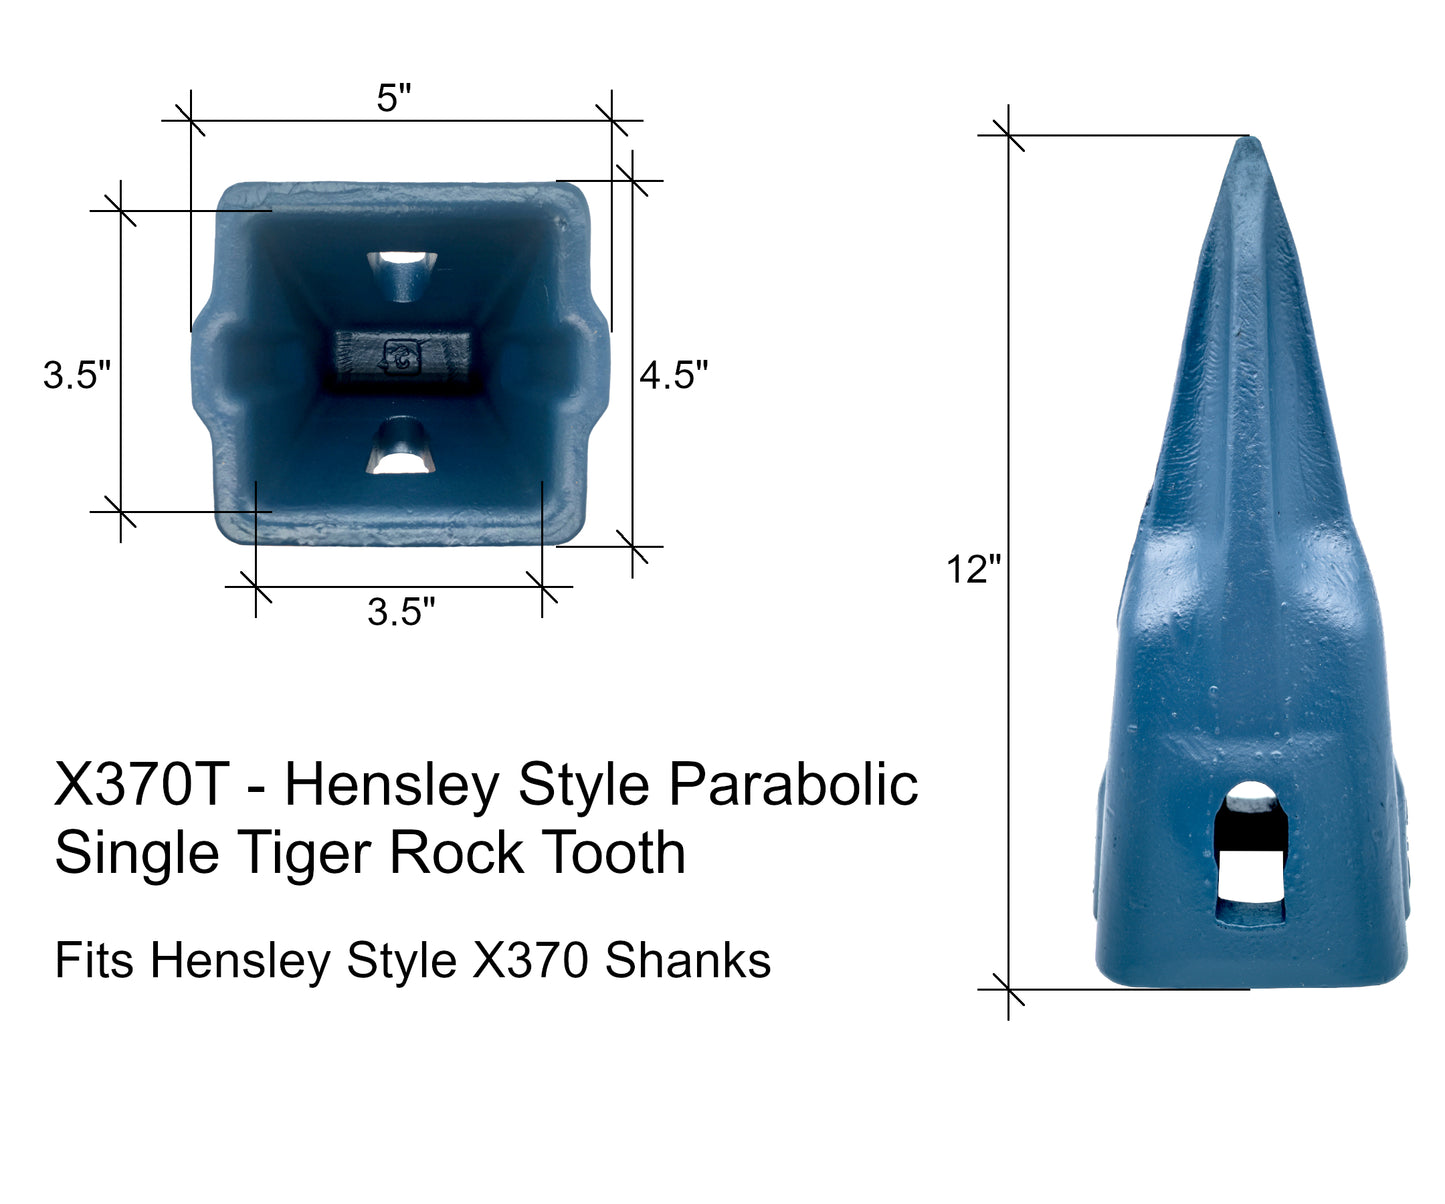 X370T Single Tiger Rock Tooth - 'Hensley X370 Style' for Excavator Buckets